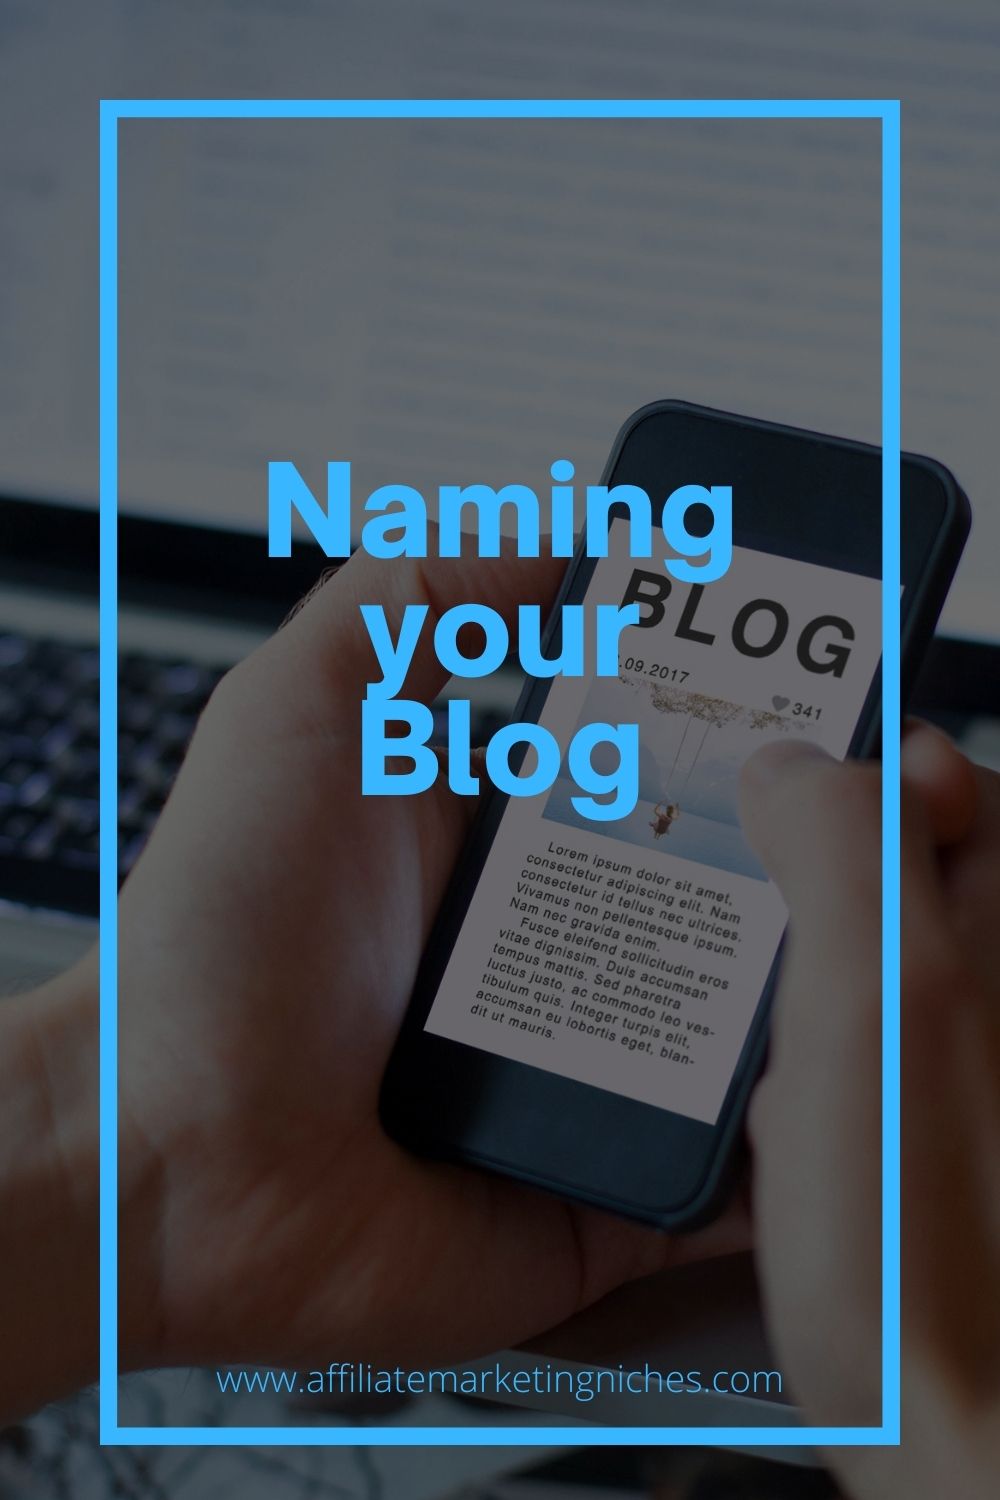 Why choosing a good name for your blog is important